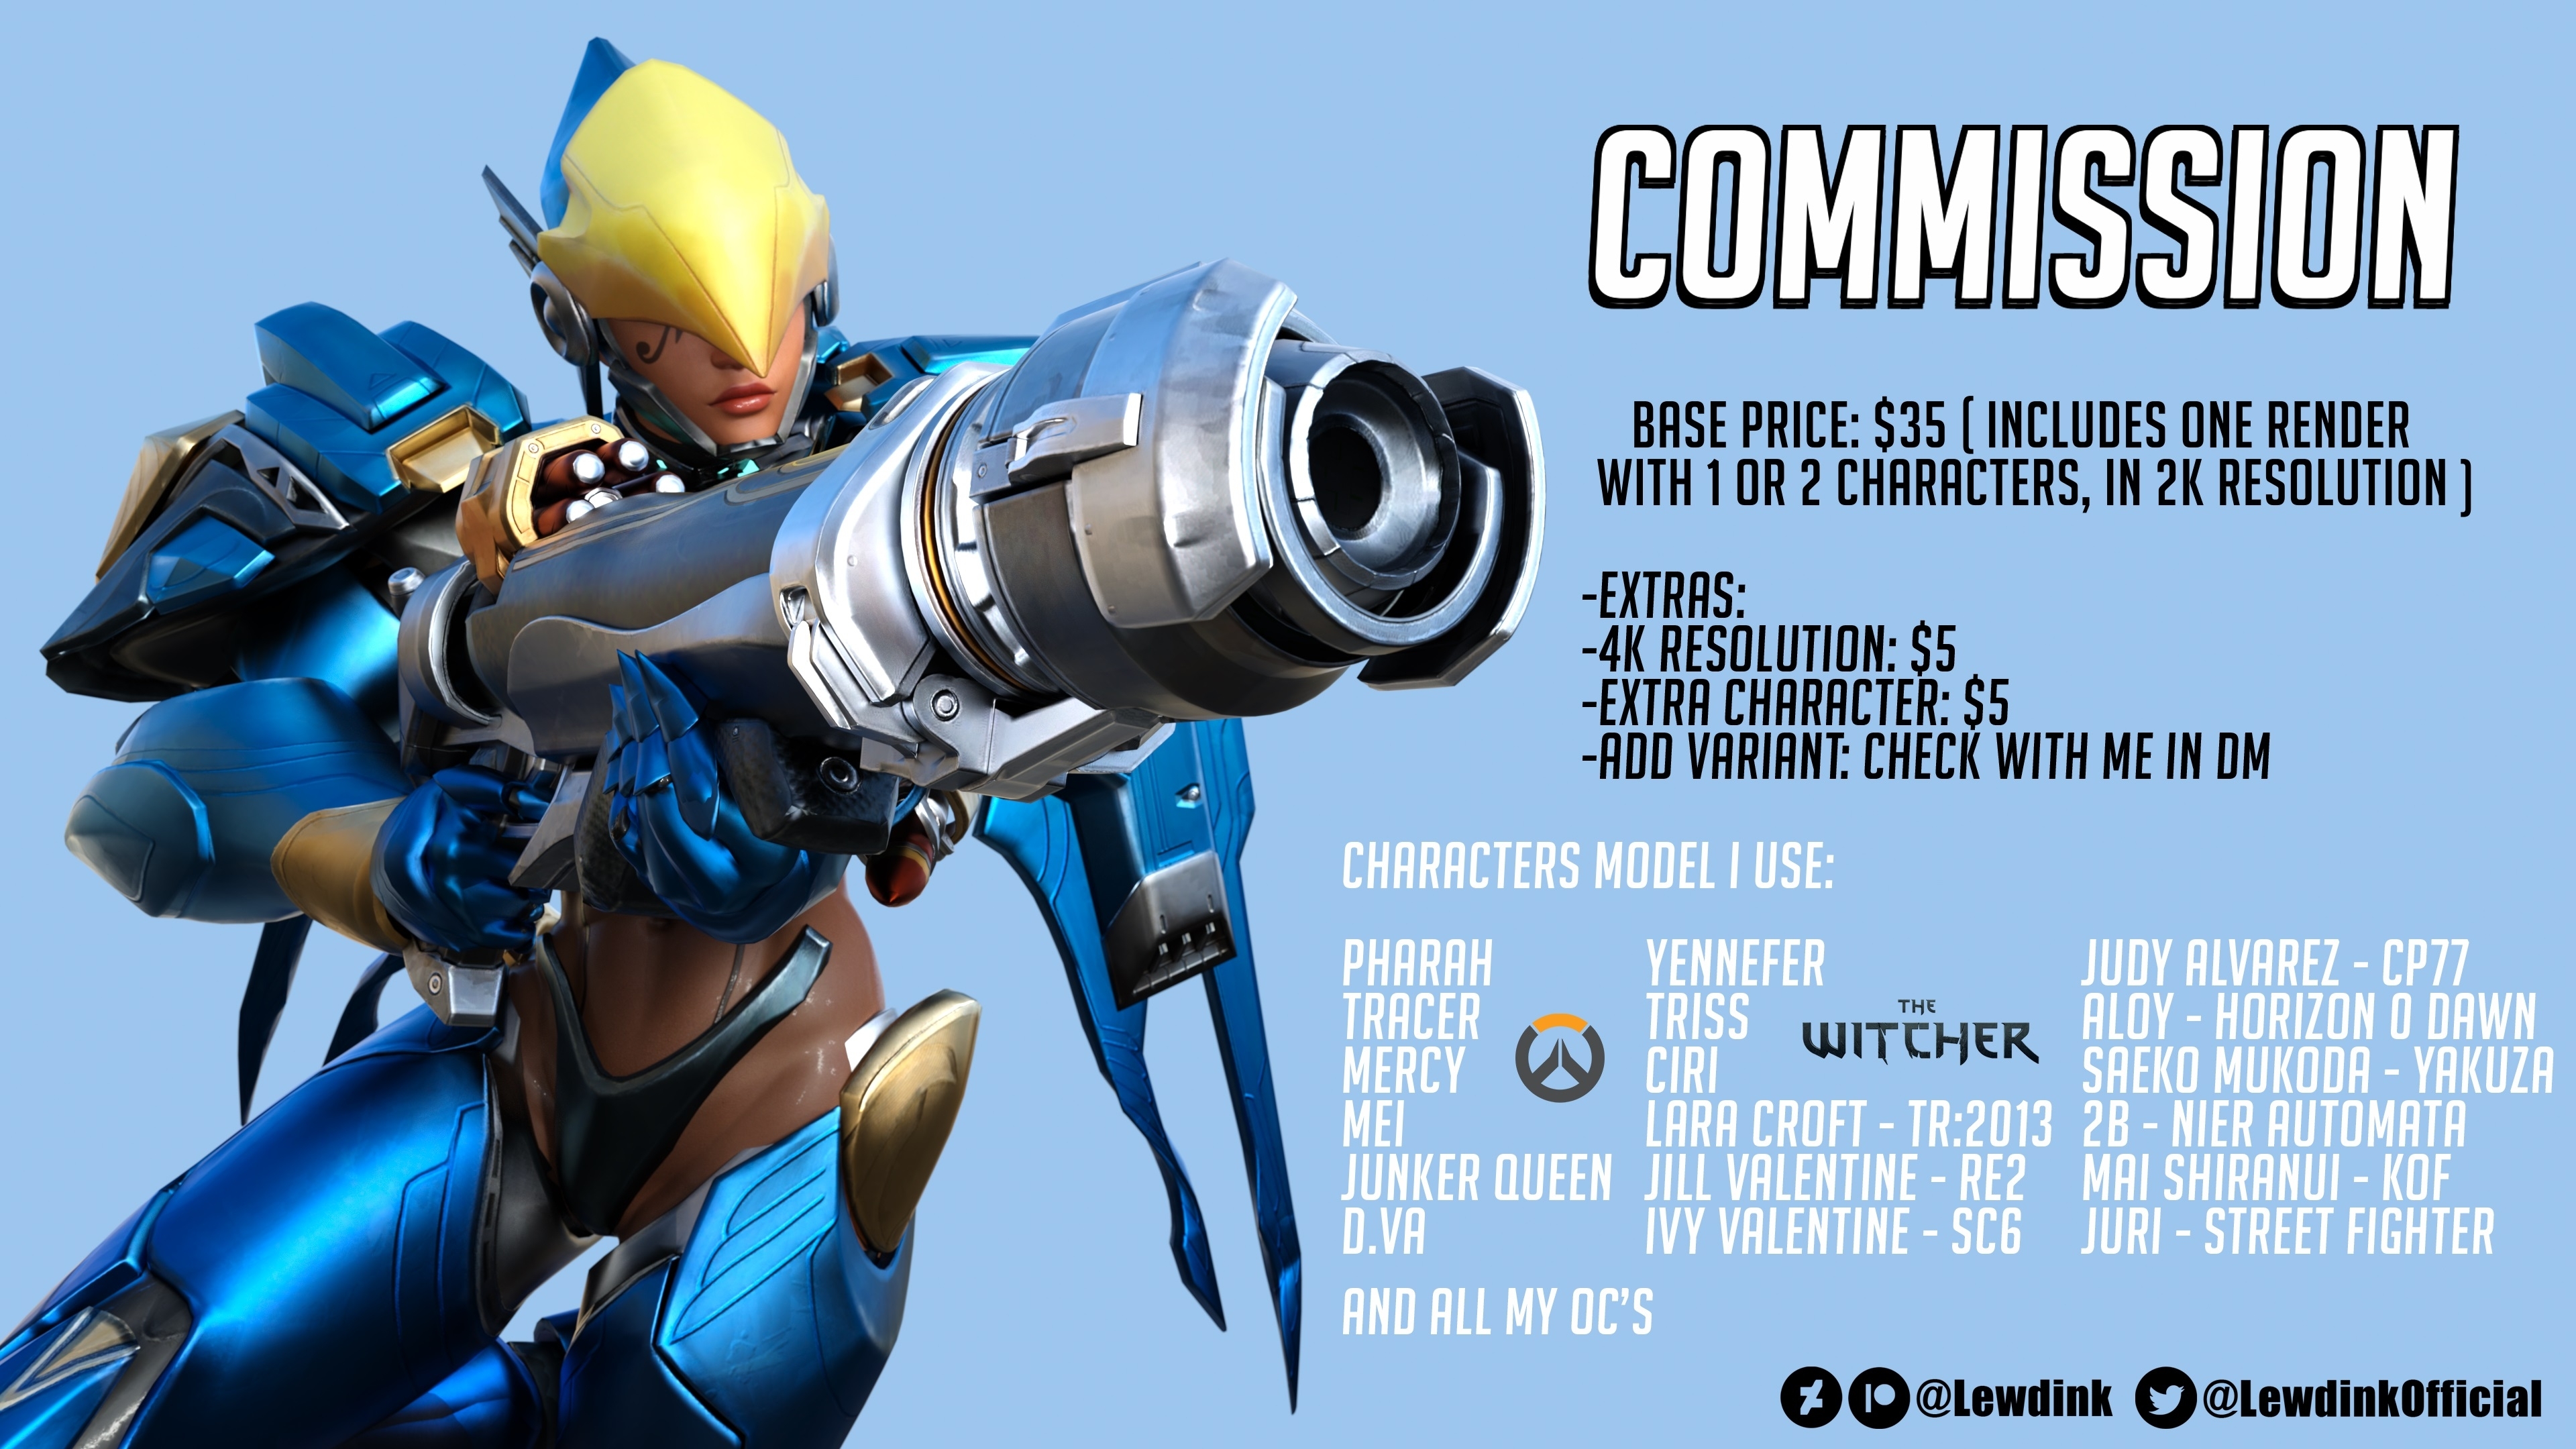 Commission Open ! Pharah Overwatch Muscular Girl 3d Porn 3d Girl 3dnsfw 3dxgirls Abs Sexy Hot Bimbo Huge Boobs Huge Tits Muscles Musclegirl Pinup Perfect Body Fuck Hard Sexyhot Sexy Ass Sexy Woman Fake Tits Lips Latex Flexible Smirking Big Tits Huge Ass Big Booty Booty Fit Fitness Thicc Mom Milf Mature Mature Woman Spread Legs Spread Thick Thighs Horny Face Short Hair Hardcore Curvy Big Ass Big boobs Big Breasts Big Butt Brown Eyes Cleavage Fishnet Stockings Fishnet Nipple Piercing Piercing Belly Button Piercing Leather Jacket Thighs Jewels Pawg Ass Red head Tribal Weapon Armor Nude Boobs Pregnant Big Balls Big Nipples Lingerie Sexy Lingerie Womb Tattoo Face Tattoo Slut Whore Bitch Comic Hotpants Shorts Long Hair Smile Blonde Graffiti Splash Body Paint Paint Squatting Japanese Korean Asian Priestess Nun Chrome Body Writings Slave Submissive Domination Cum Facial Cumshot Cum Inside Cum Covered Cum In Mouth Tongue Out Tongue Long Tongue Grabbing Arms Grab Grab Boobs Prostitute Hooker Toilet Futanari Futa Musclewoman Thai Fanart High Heels Platform Heels Ninja